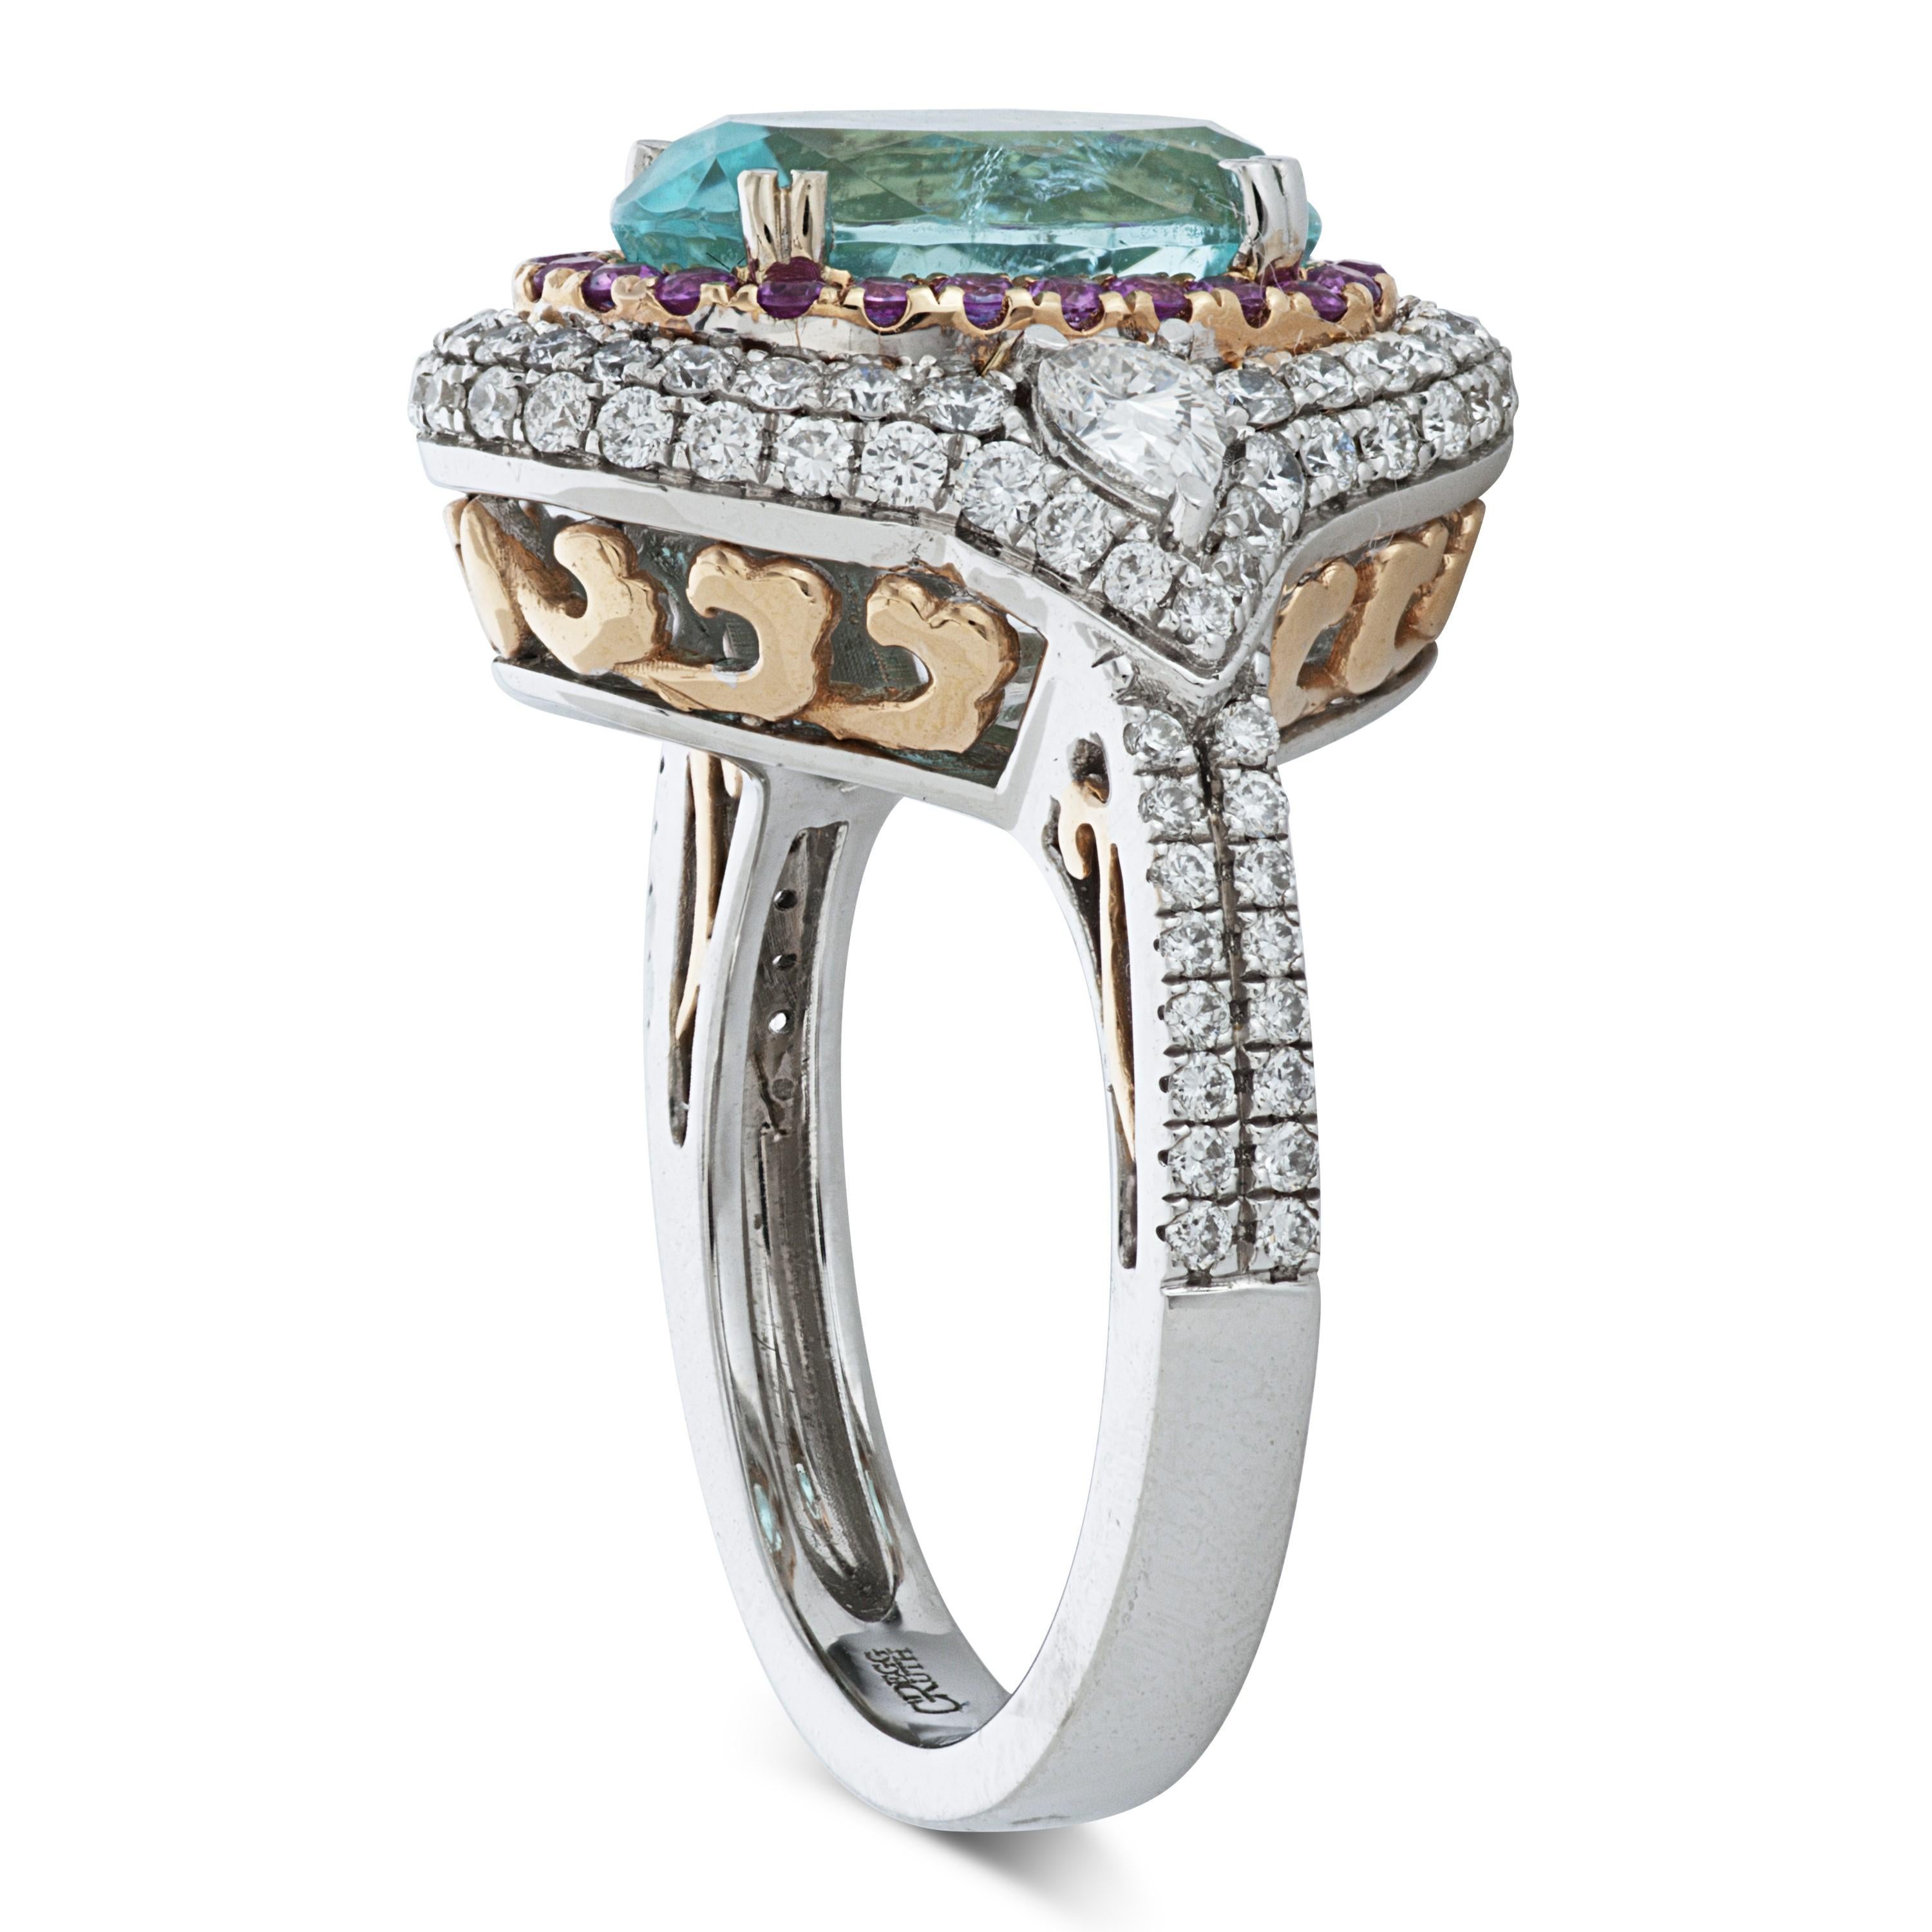 Gregg Ruth Atrium Collection Paraiba tourmaline, pink sapphire and diamond 18k white gold ring accompanied by an AGL report and a Gregg Ruth certificate of authenticity.

This Gregg Ruth ring features an oval shaped 3.81 carat Mozambique Paraiba